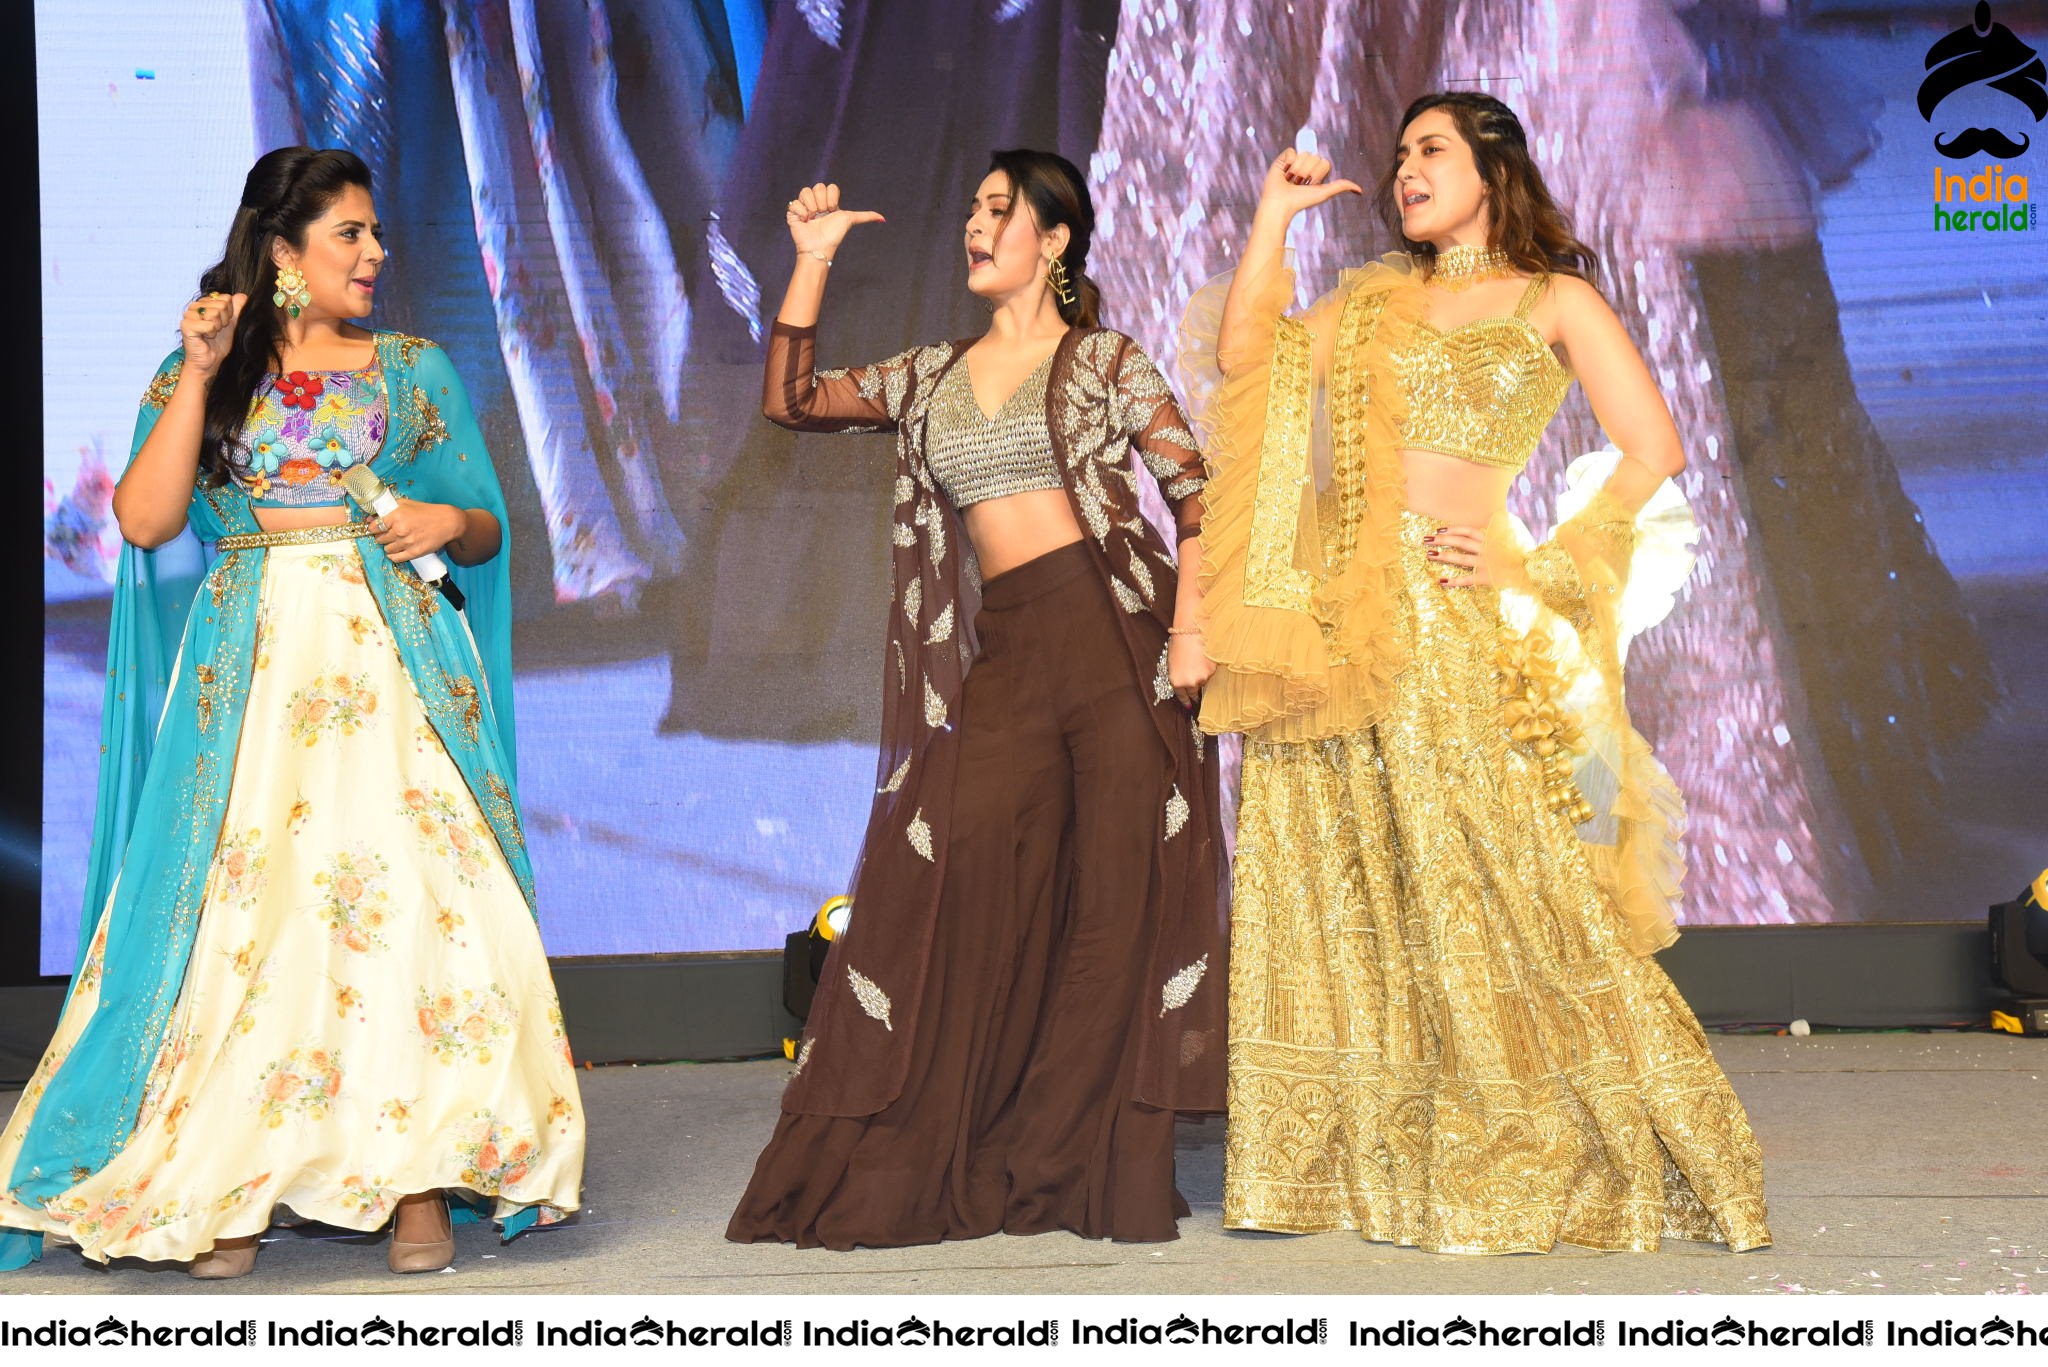 Sree Mukhi joins Payal and Raashi Khanna while dancing and setting stage on fire